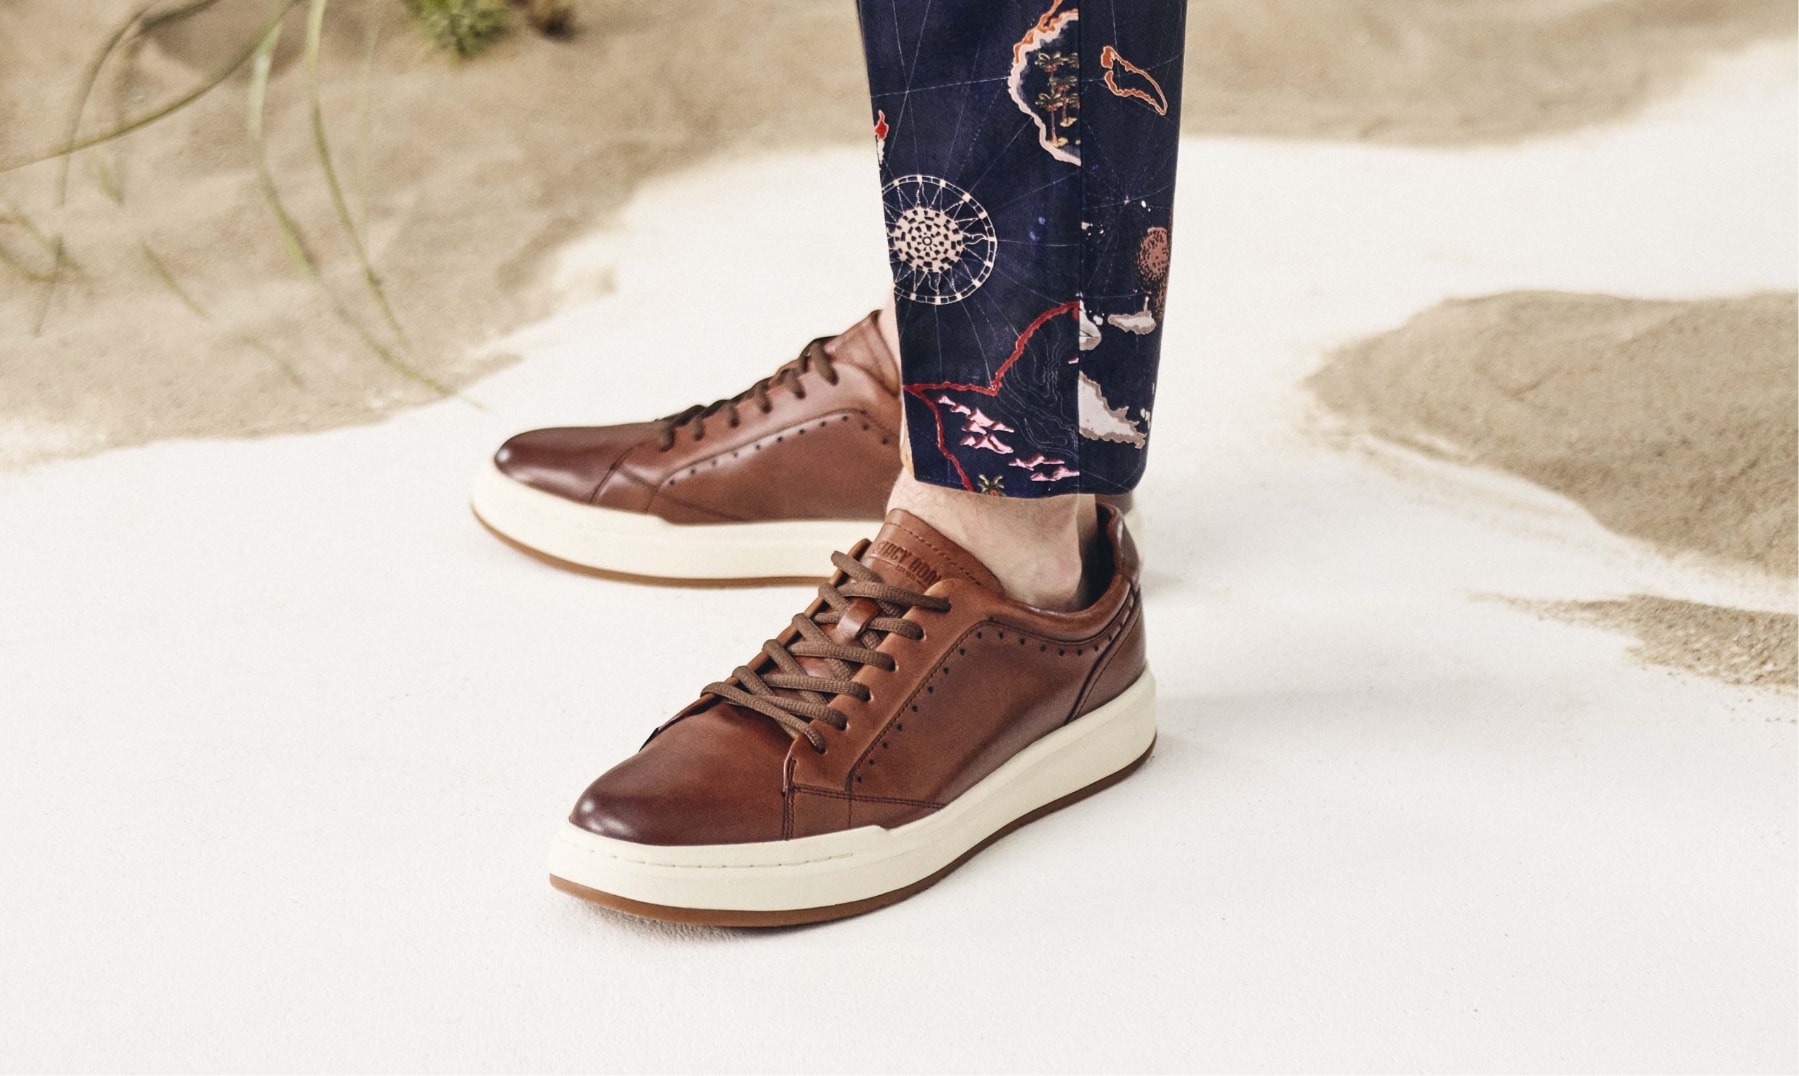 Click to shop Stacy Adams sneakers. Image features the collins in cognac.